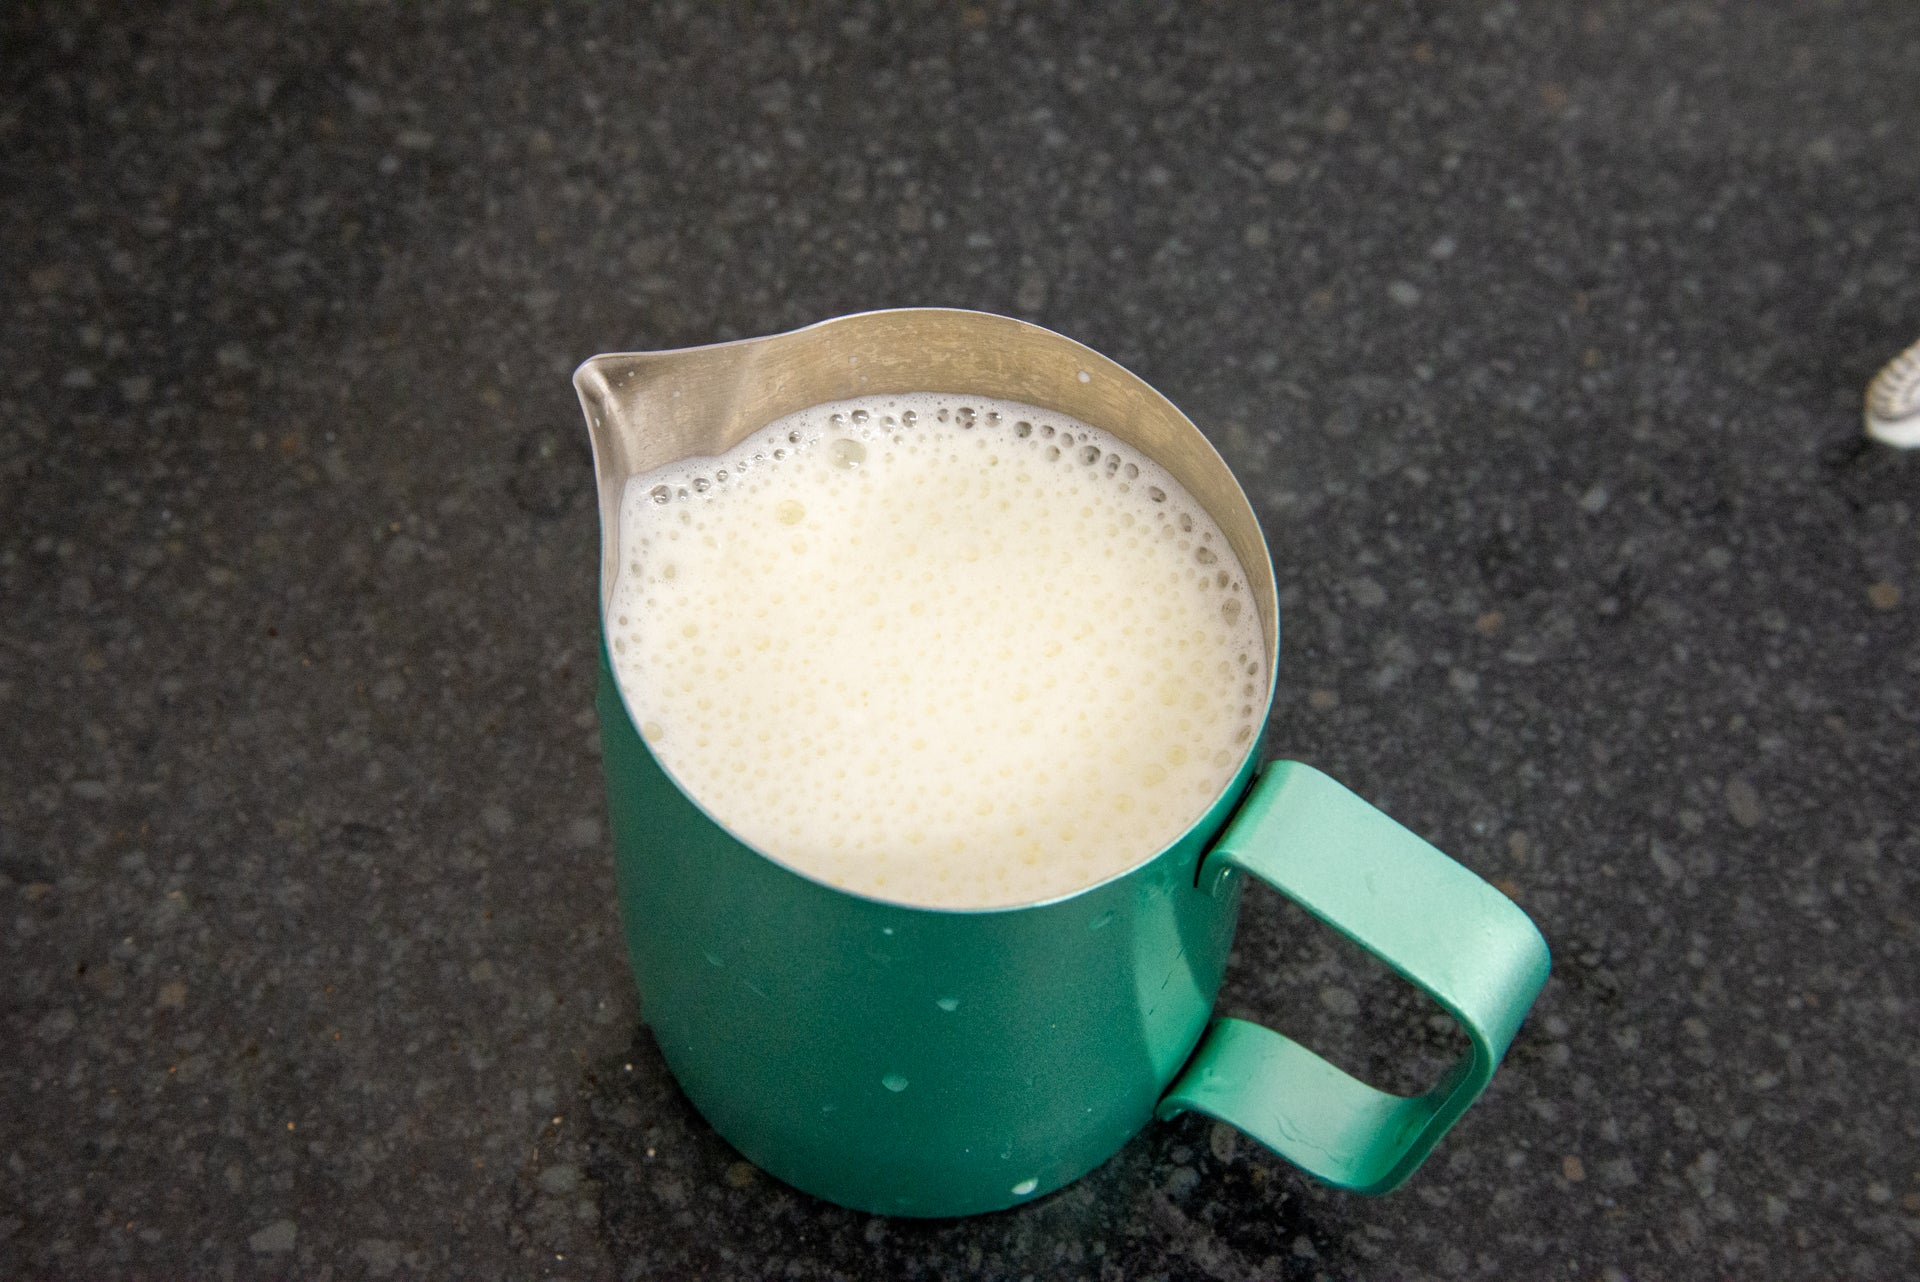 Aerolatte Stainless Steel Milk Frother with Stand frothed milk